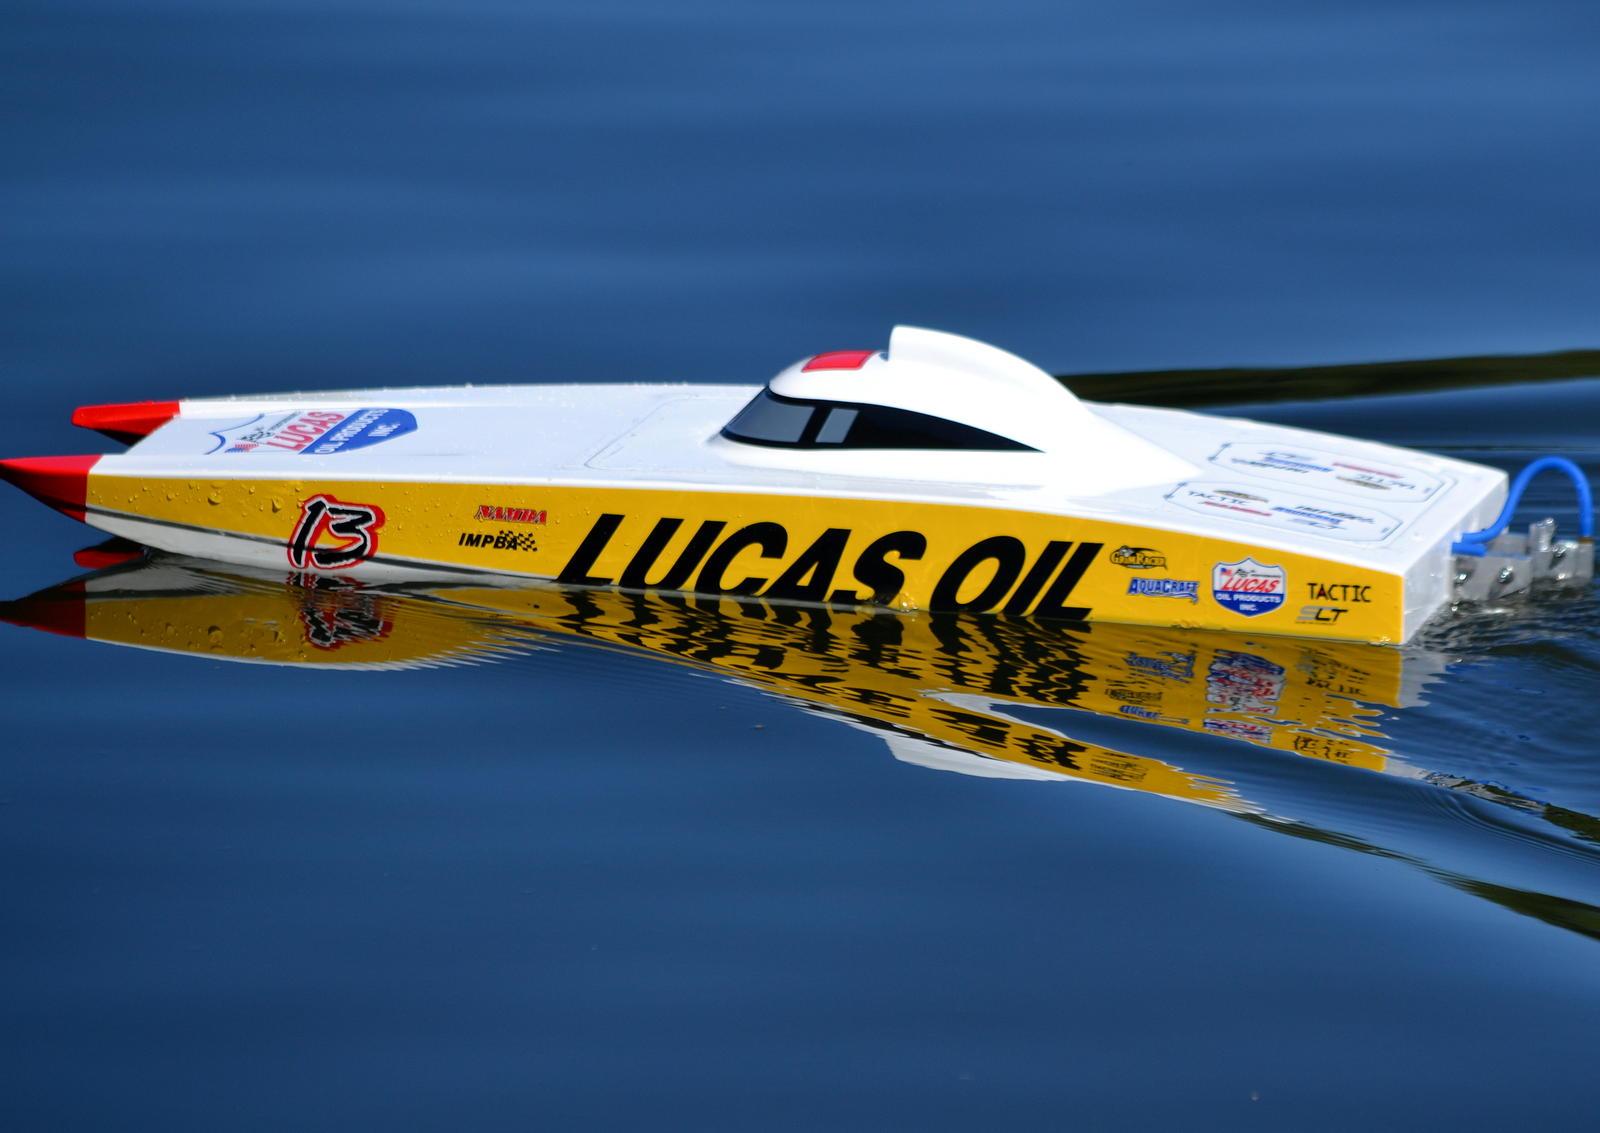 Aquacraft Lucas Oil Rc Boat: Maintenance and Support for Aquacraft Lucas Oil RC Boat